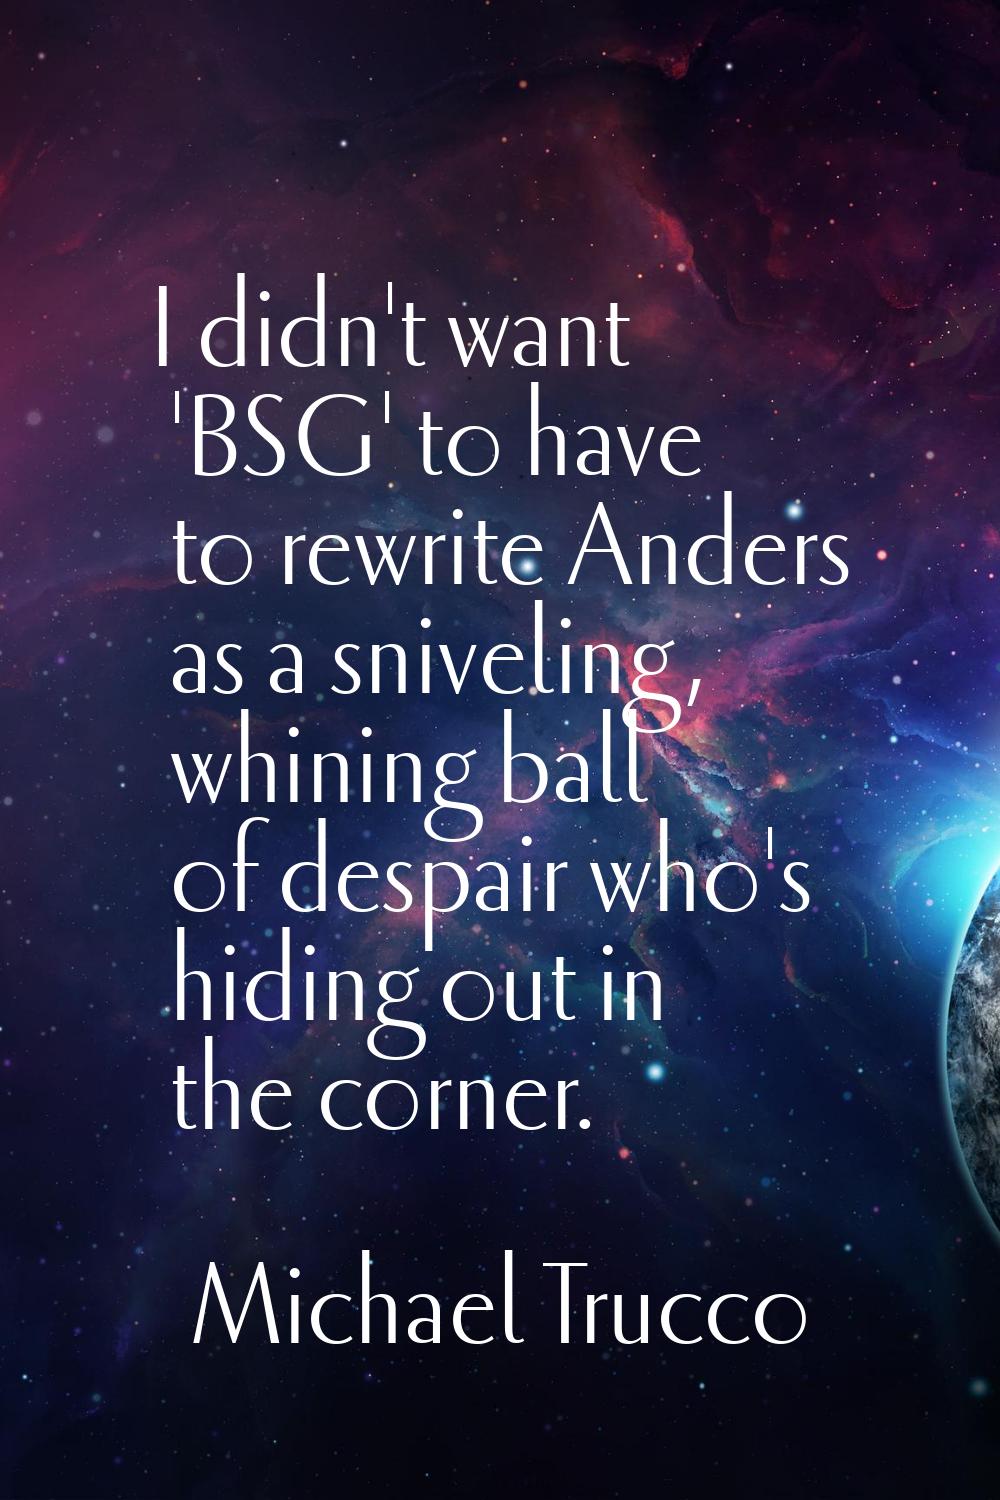 I didn't want 'BSG' to have to rewrite Anders as a sniveling, whining ball of despair who's hiding 